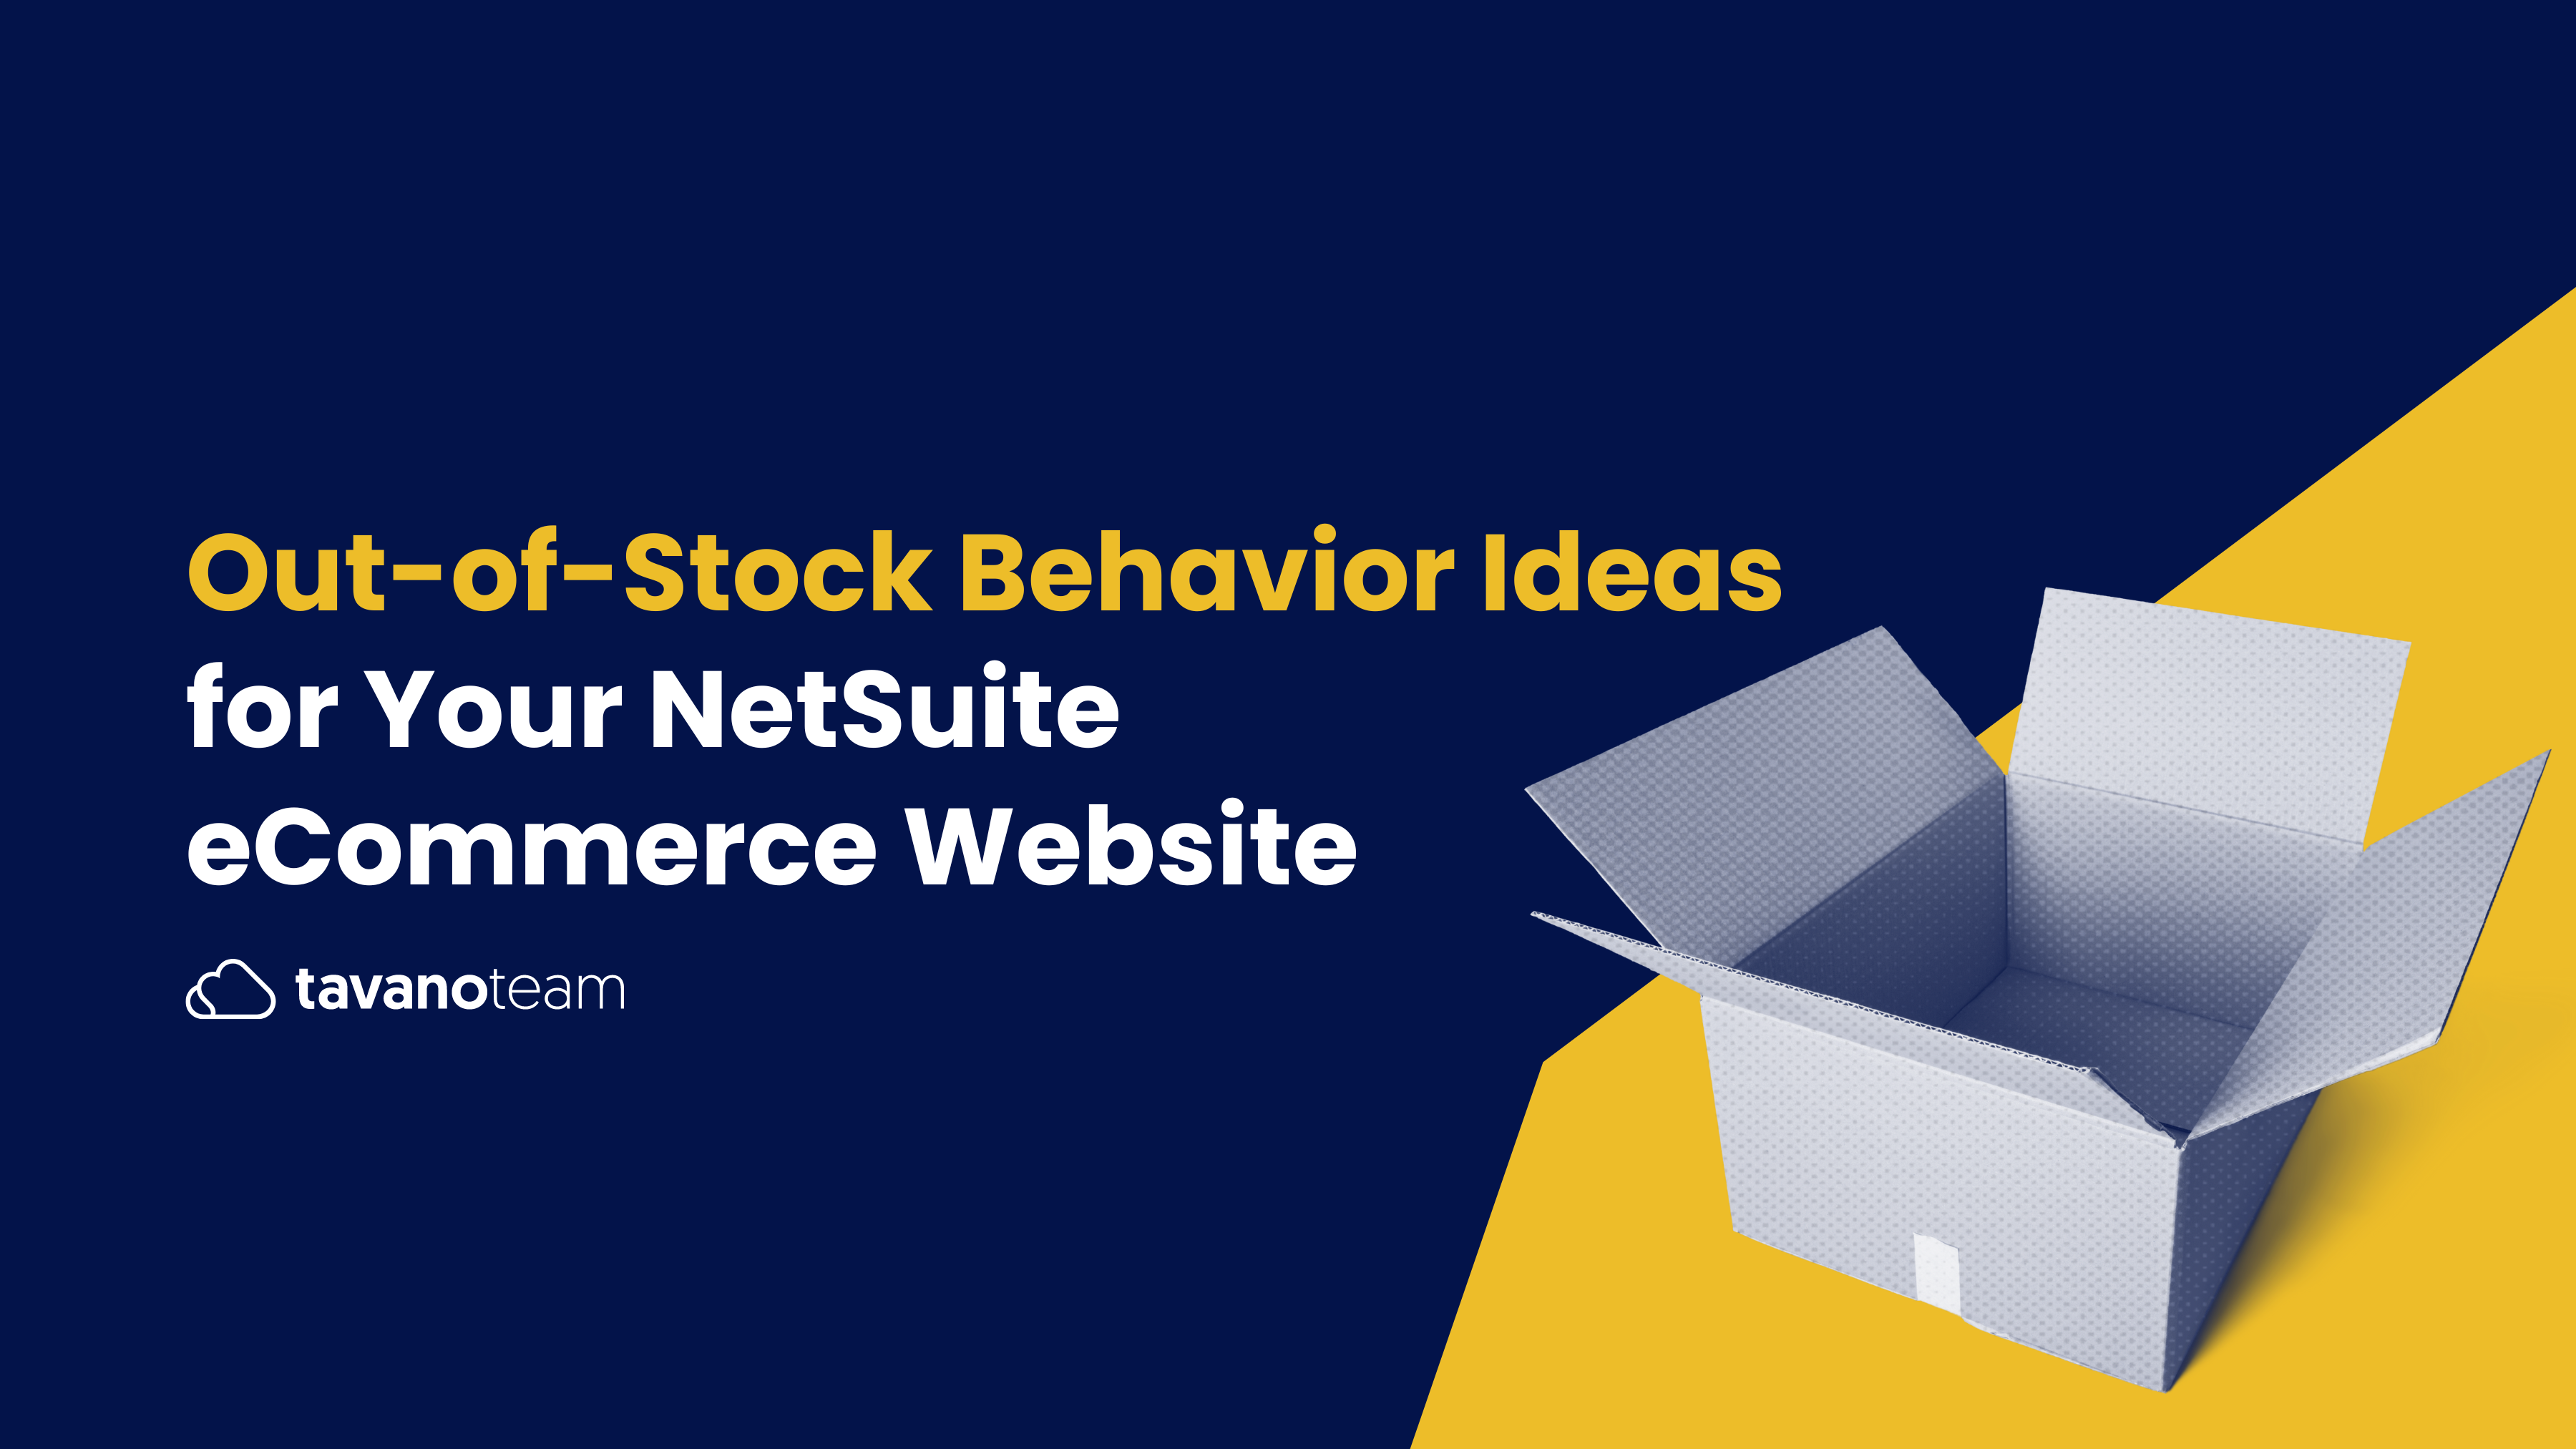 out-of-stock-behavior-ideas-for-your-netsuite-ecommerce-website